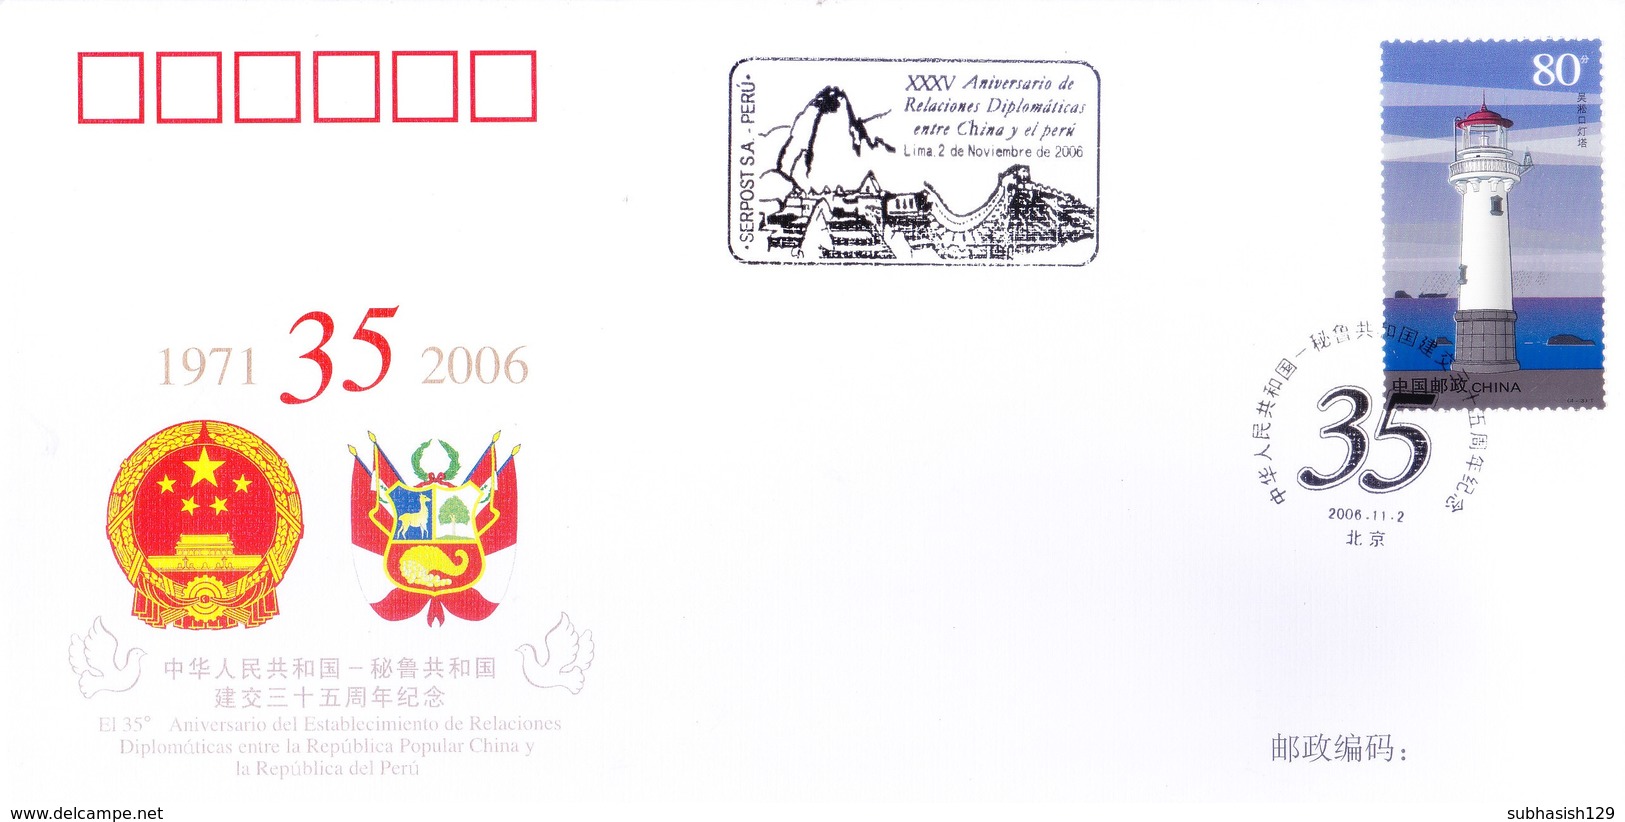 CHINA : FIRST DAY COVER : 15TH ANNIVERSARY OF PERU DIPLOMATIC RELATIONSHIP - 02-11-2006 - Covers & Documents